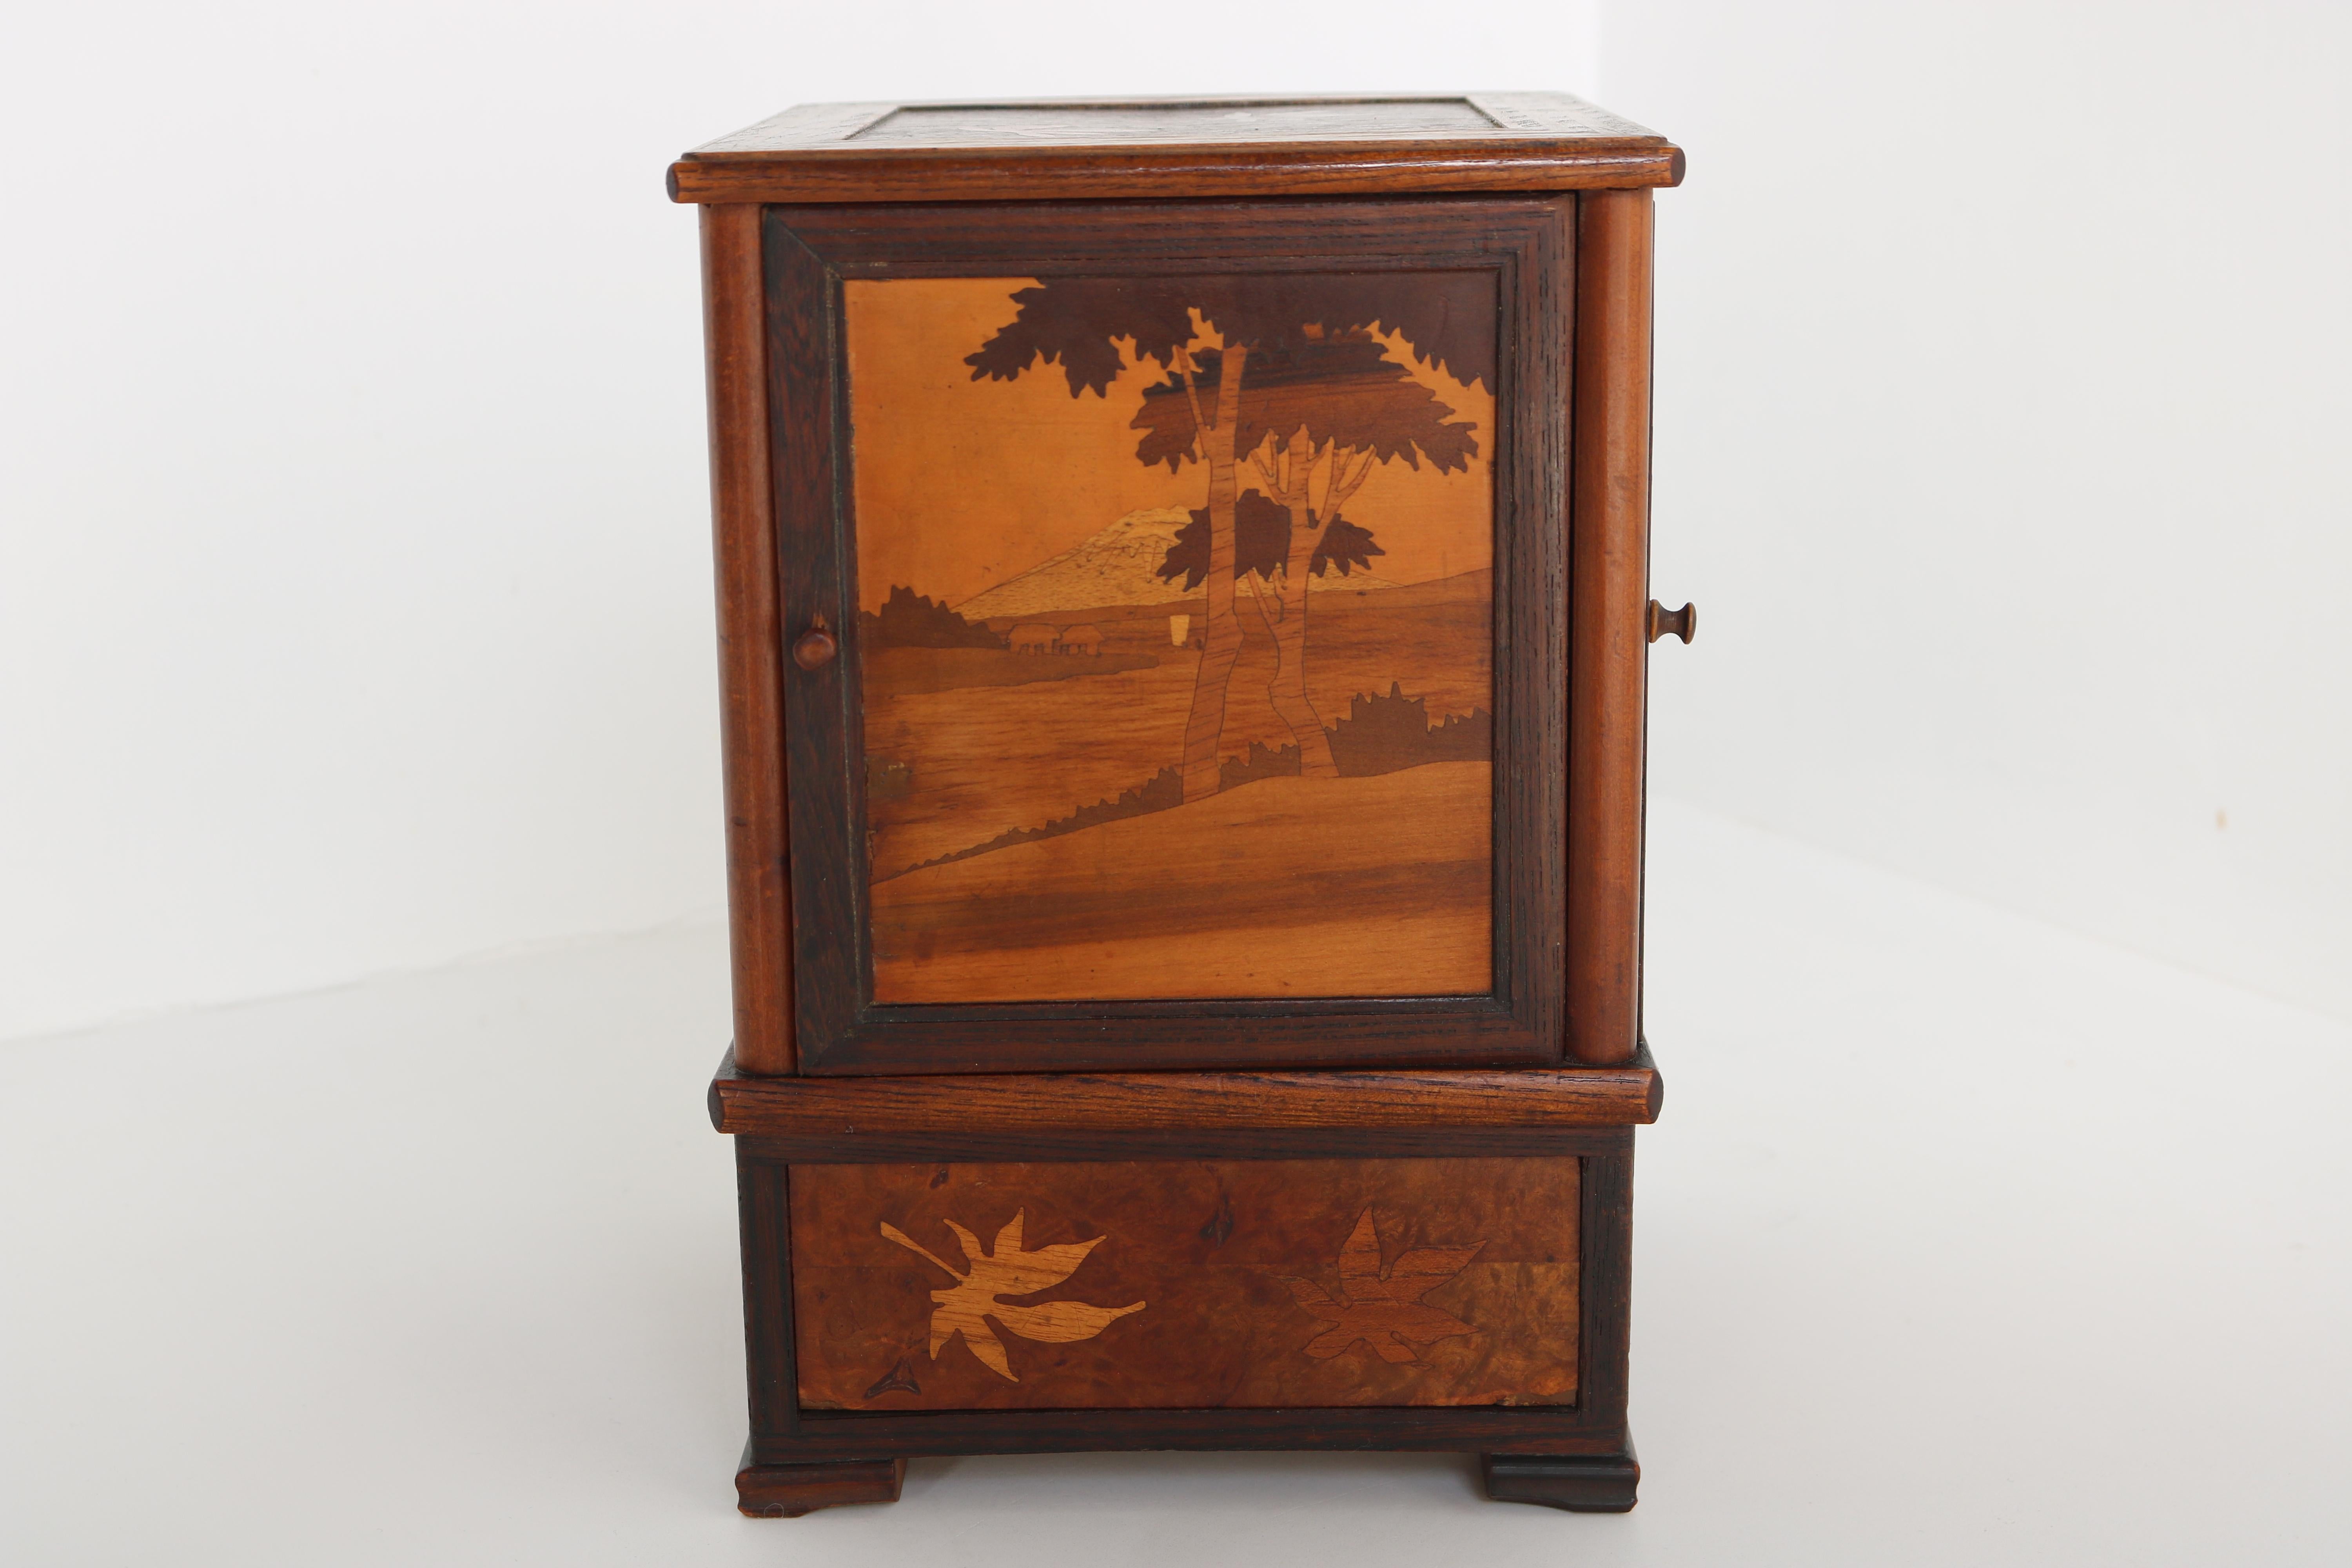 Antique French Inlaid Marquetry Cigar Box 1900 Cigarette Cabinet Desk Decoration For Sale 7